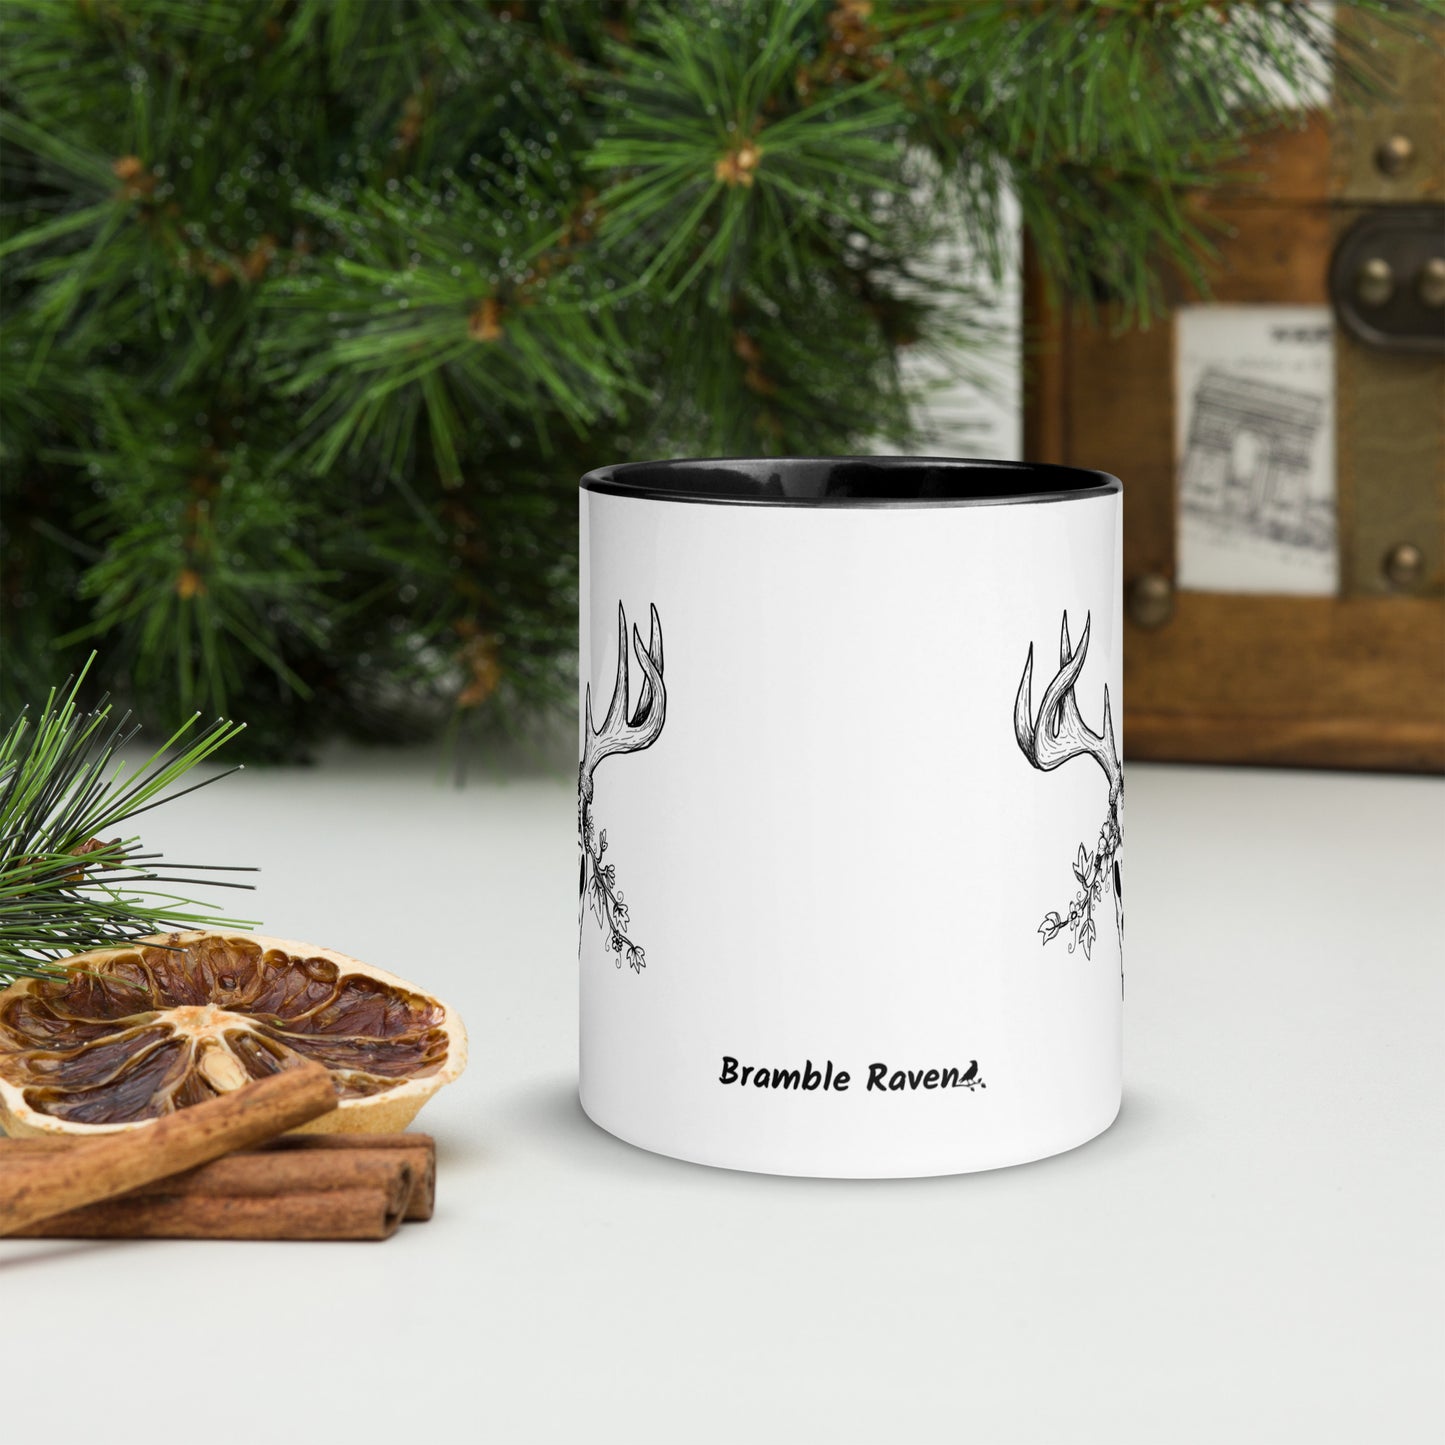 11 ounce ceramic mug with hand illustrated deer skull wreathed in flowers. Double-sided design. Mug has black rim, handle, and inside. Front image of mug shows Bramble Raven logo. Shown sitting on a tabletop by pine branches, cinnamon sticks, and dried orange slice.